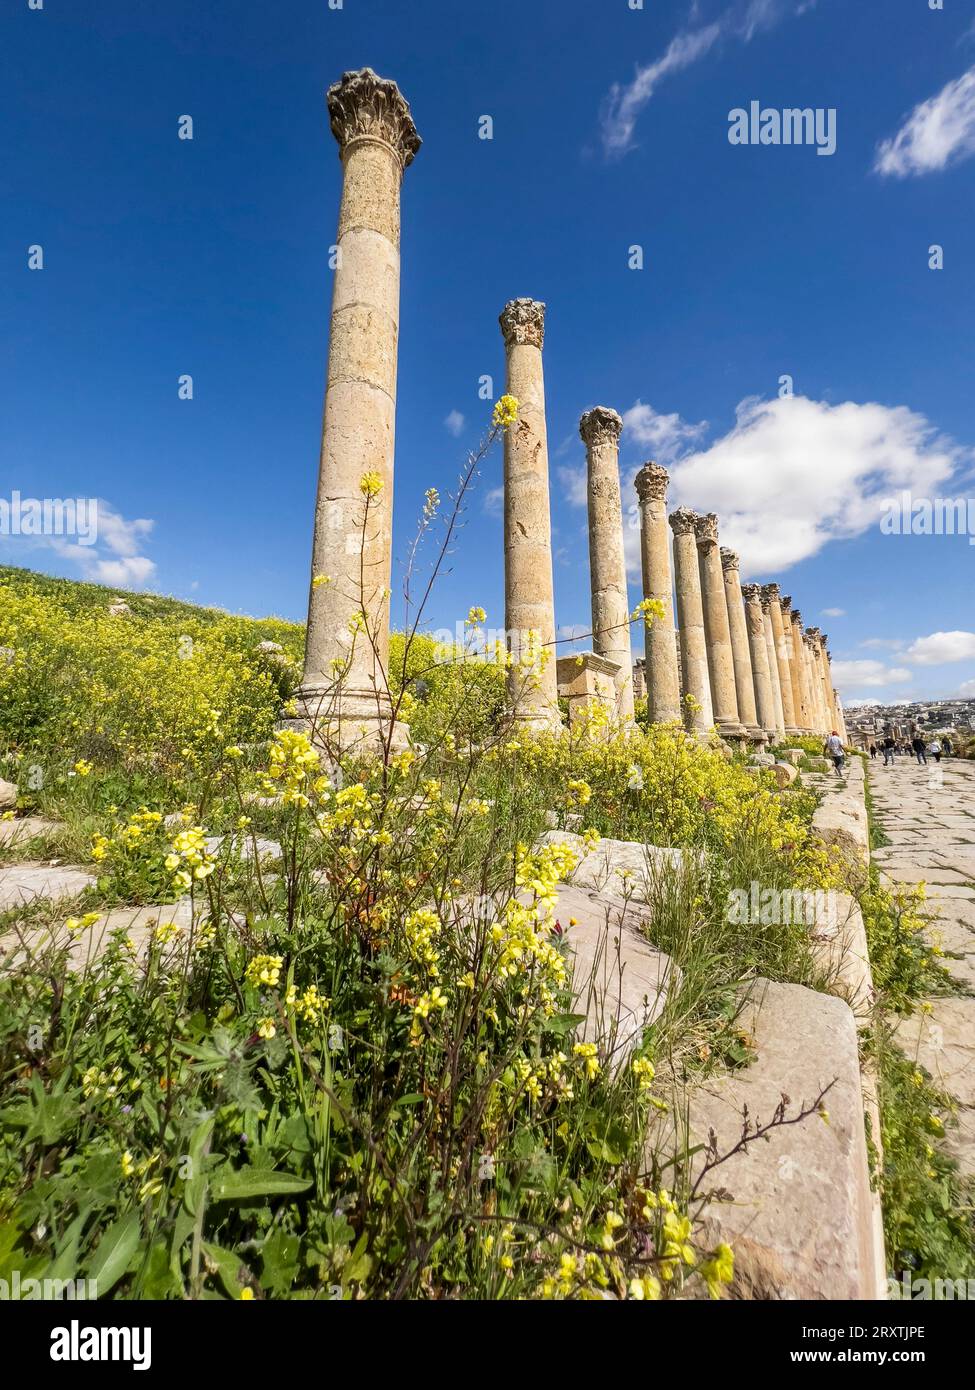 Flowers in front of columns in the ancient city of Jerash, believed to be founded in 331 BC by Alexander the Great, Jerash, Jordan, Middle East Stock Photo